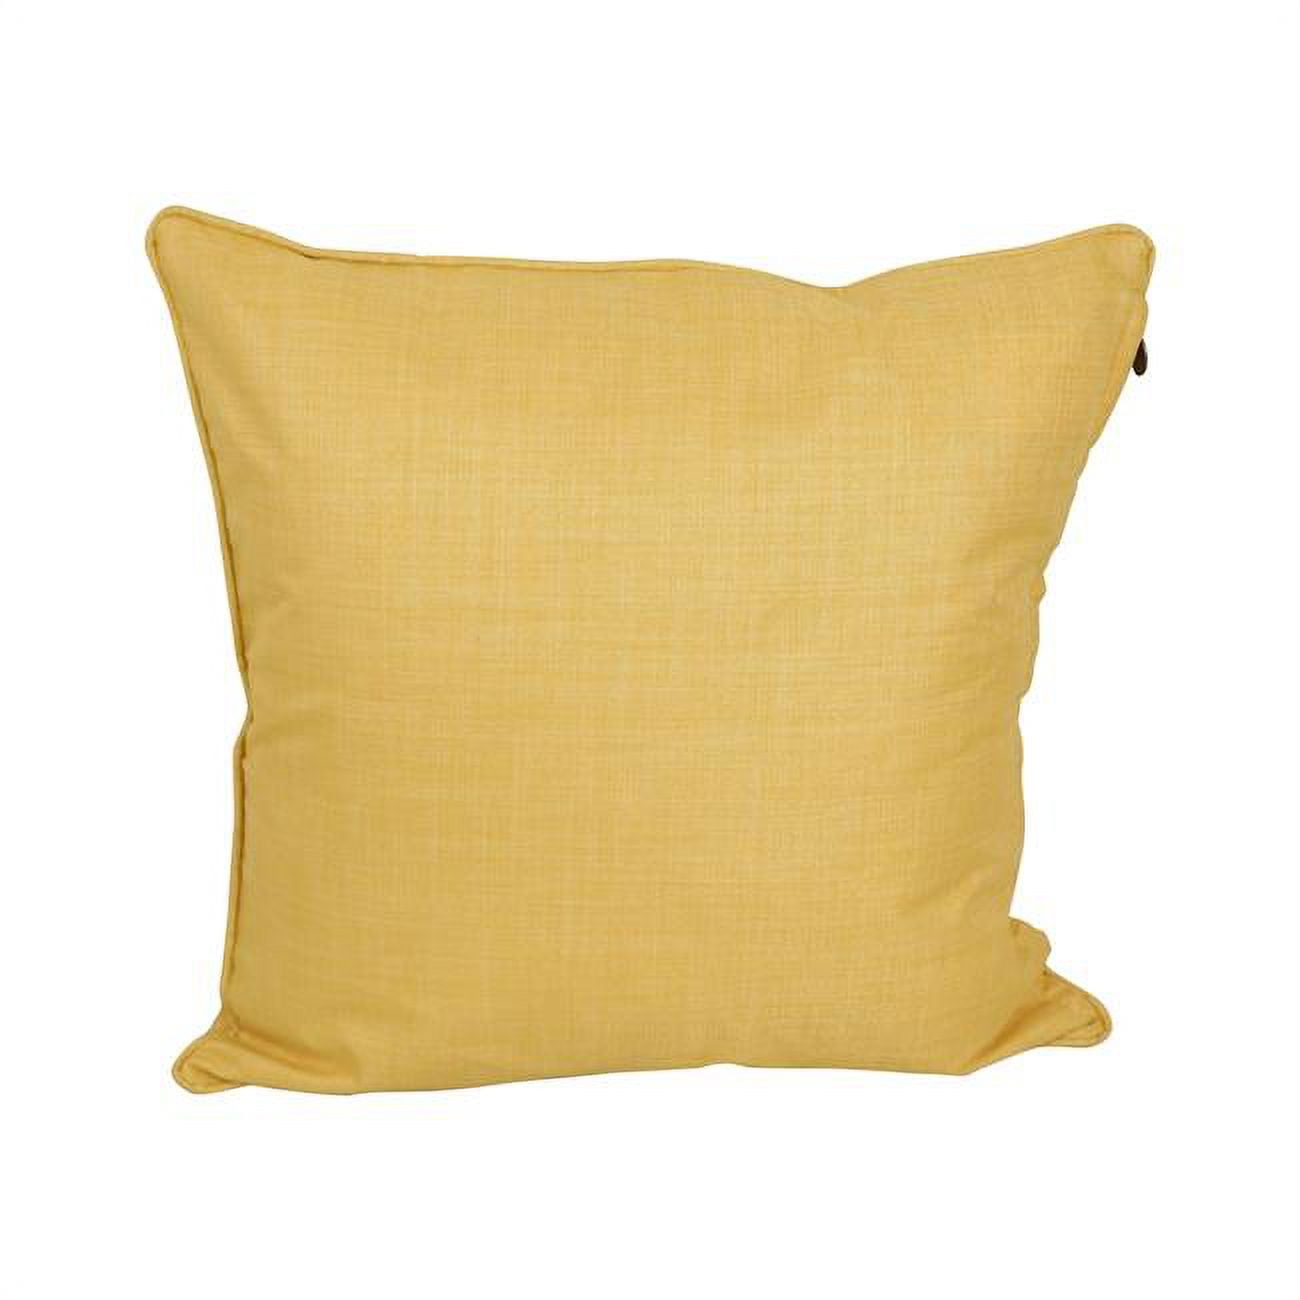 Picture of Blazing Needles 9813-CD-S1-REO-SOL-03 25 in. Double-Corded Spun Polyester Square Floor Pillow with Insert, Lemon